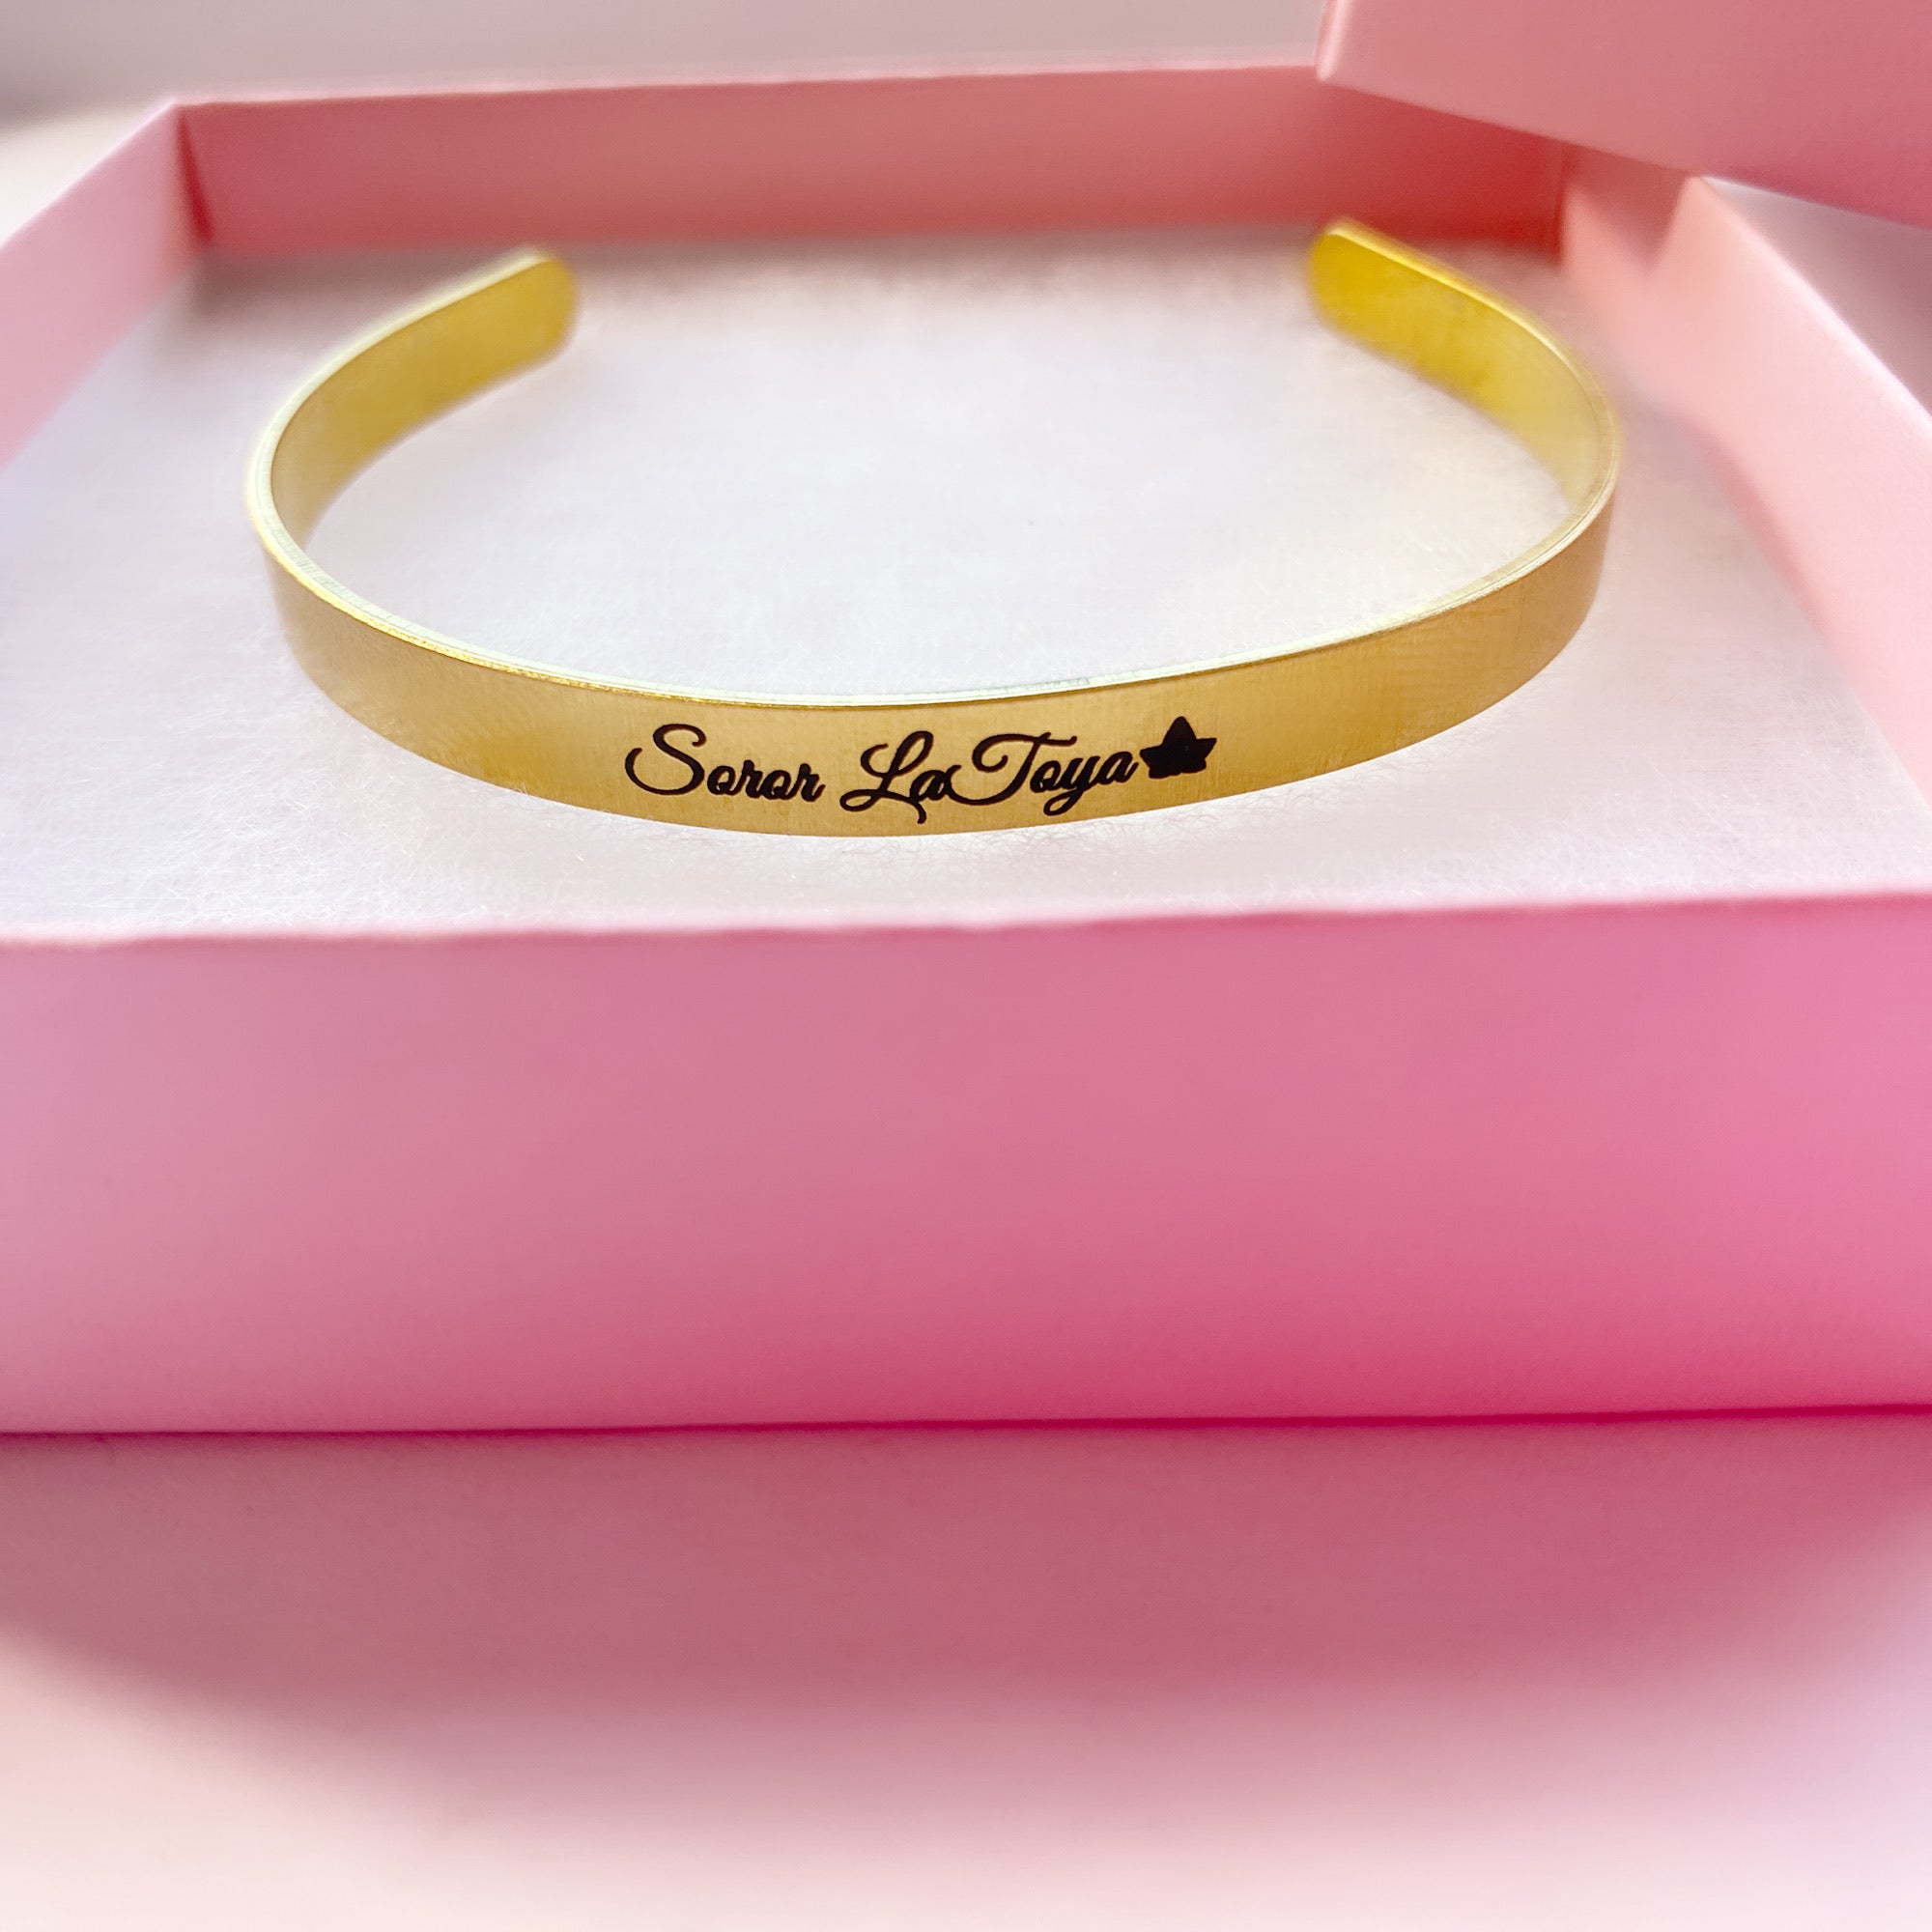 Personalized brass Bracelet with soror name engraved.